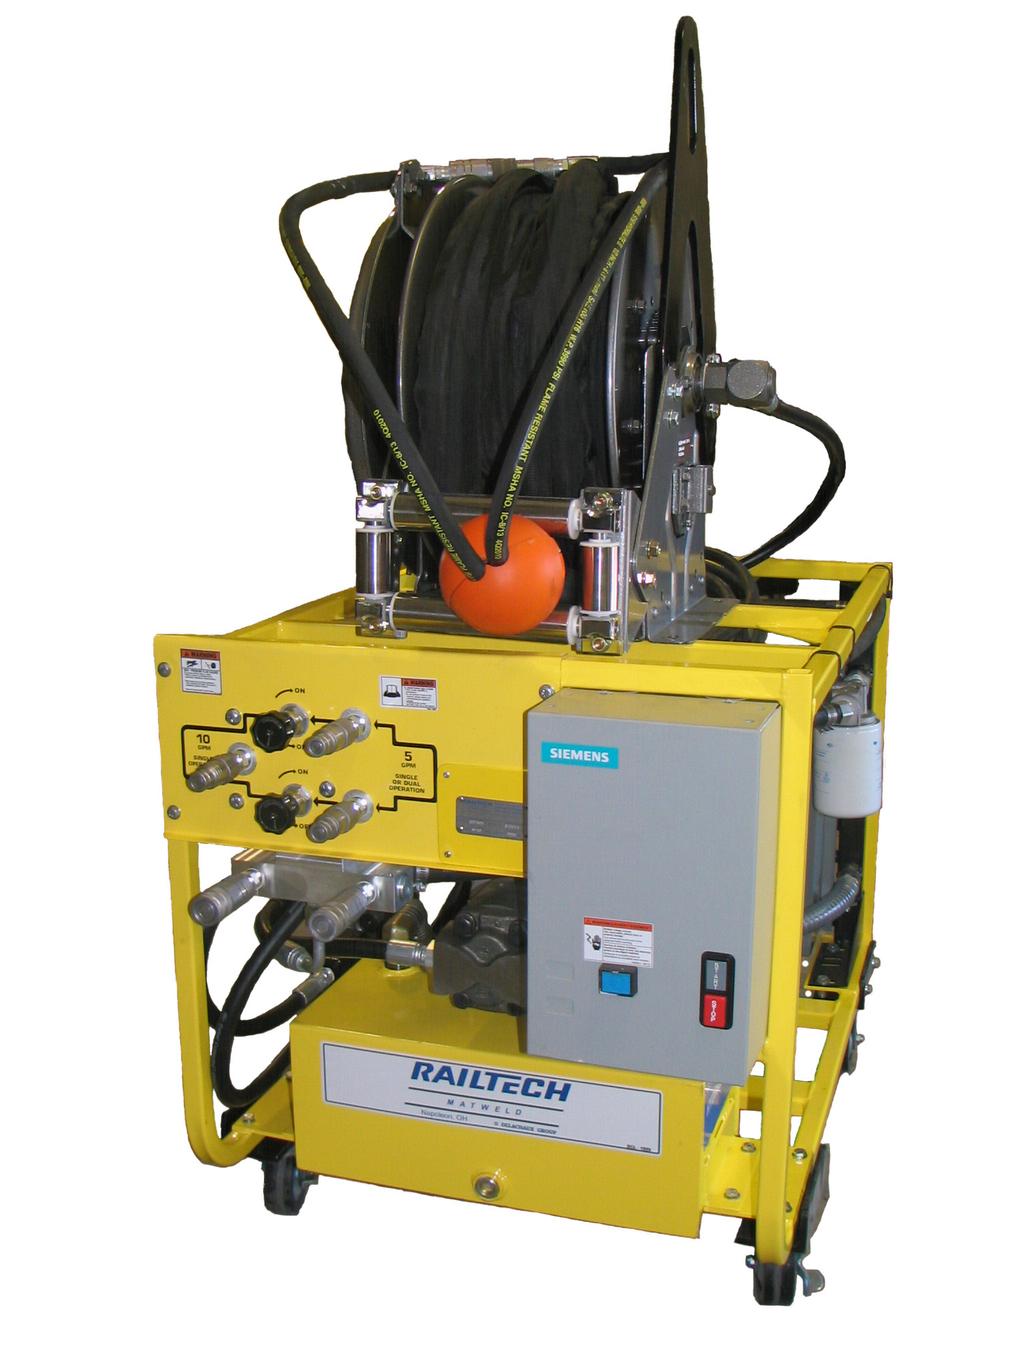 03700A ELECTRIC POWER UNIT The Railtech Matweld Electric Power Unit is designed to deliver two 5 GPM circuits or one 10 GPM circuit at 2000 PSI for hydraulic tool operations in buildings or other